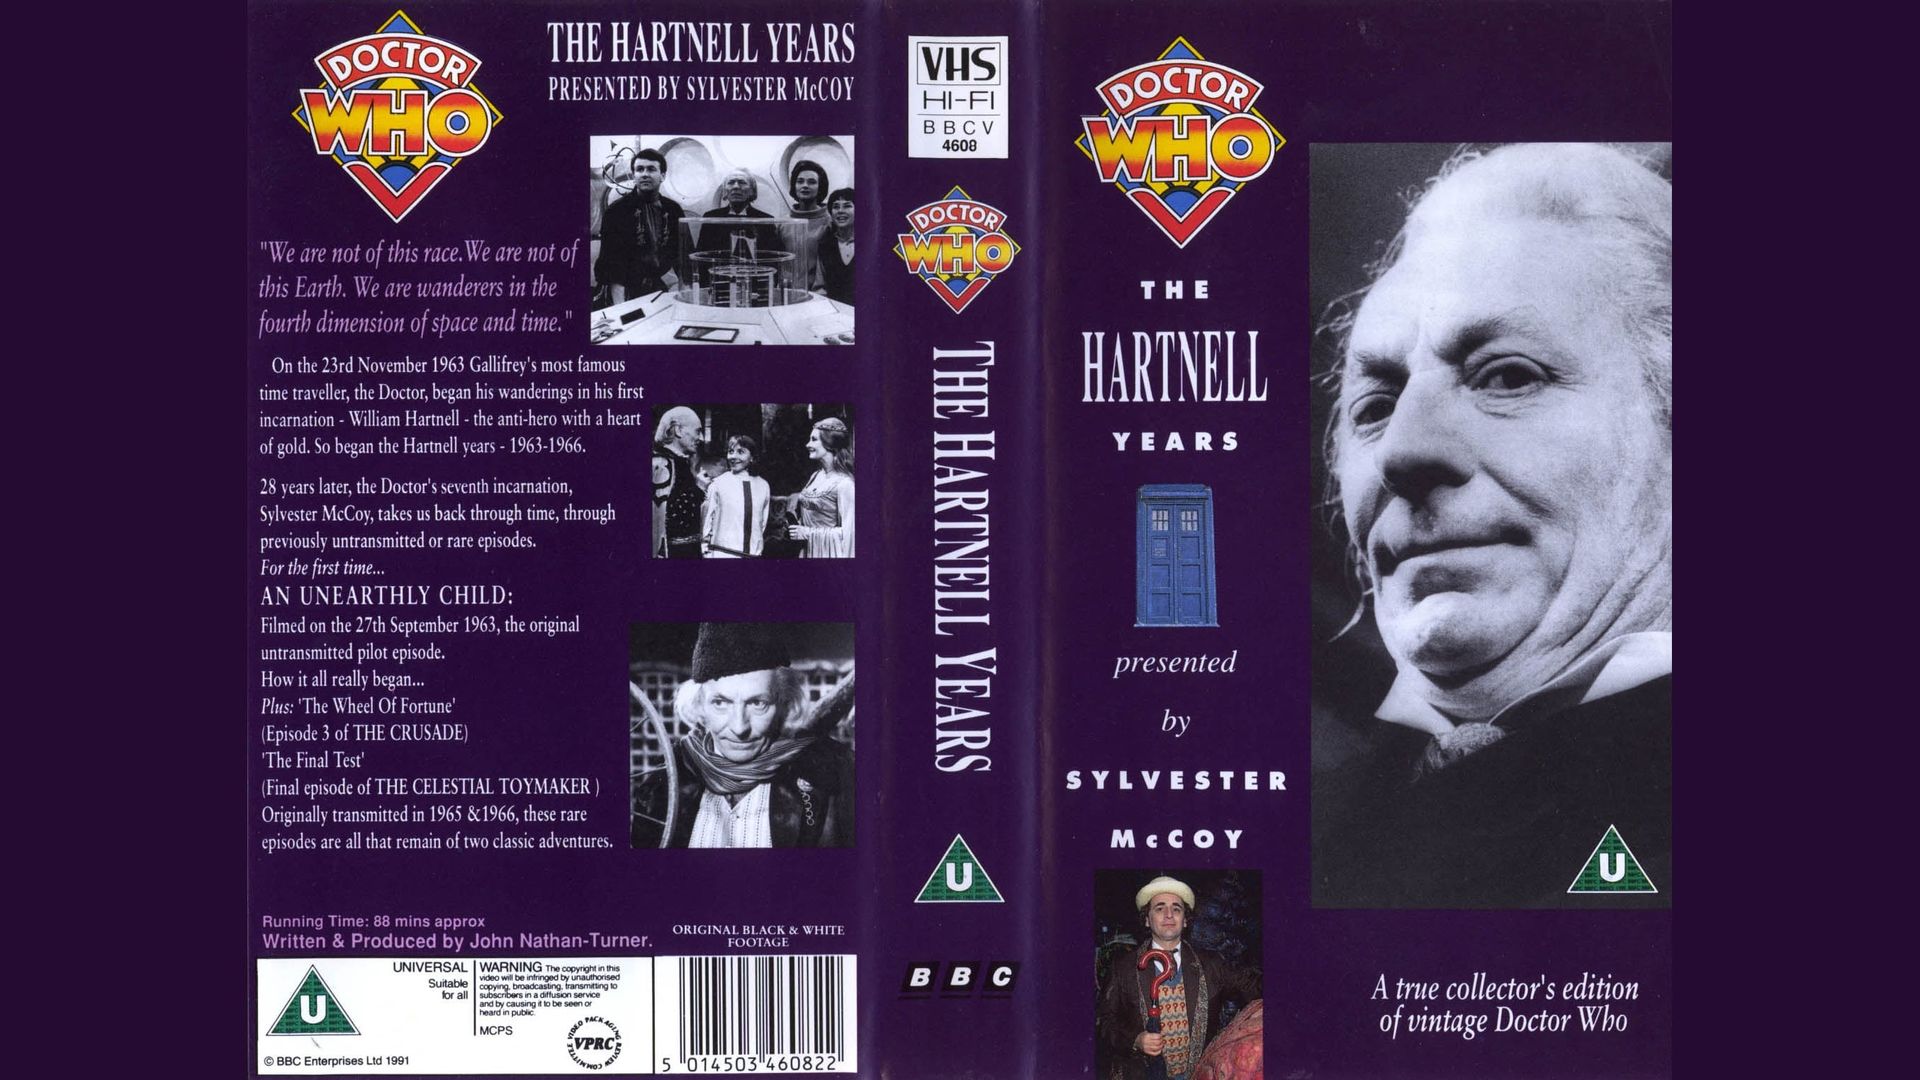 Doctor Who: The Hartnell Years background